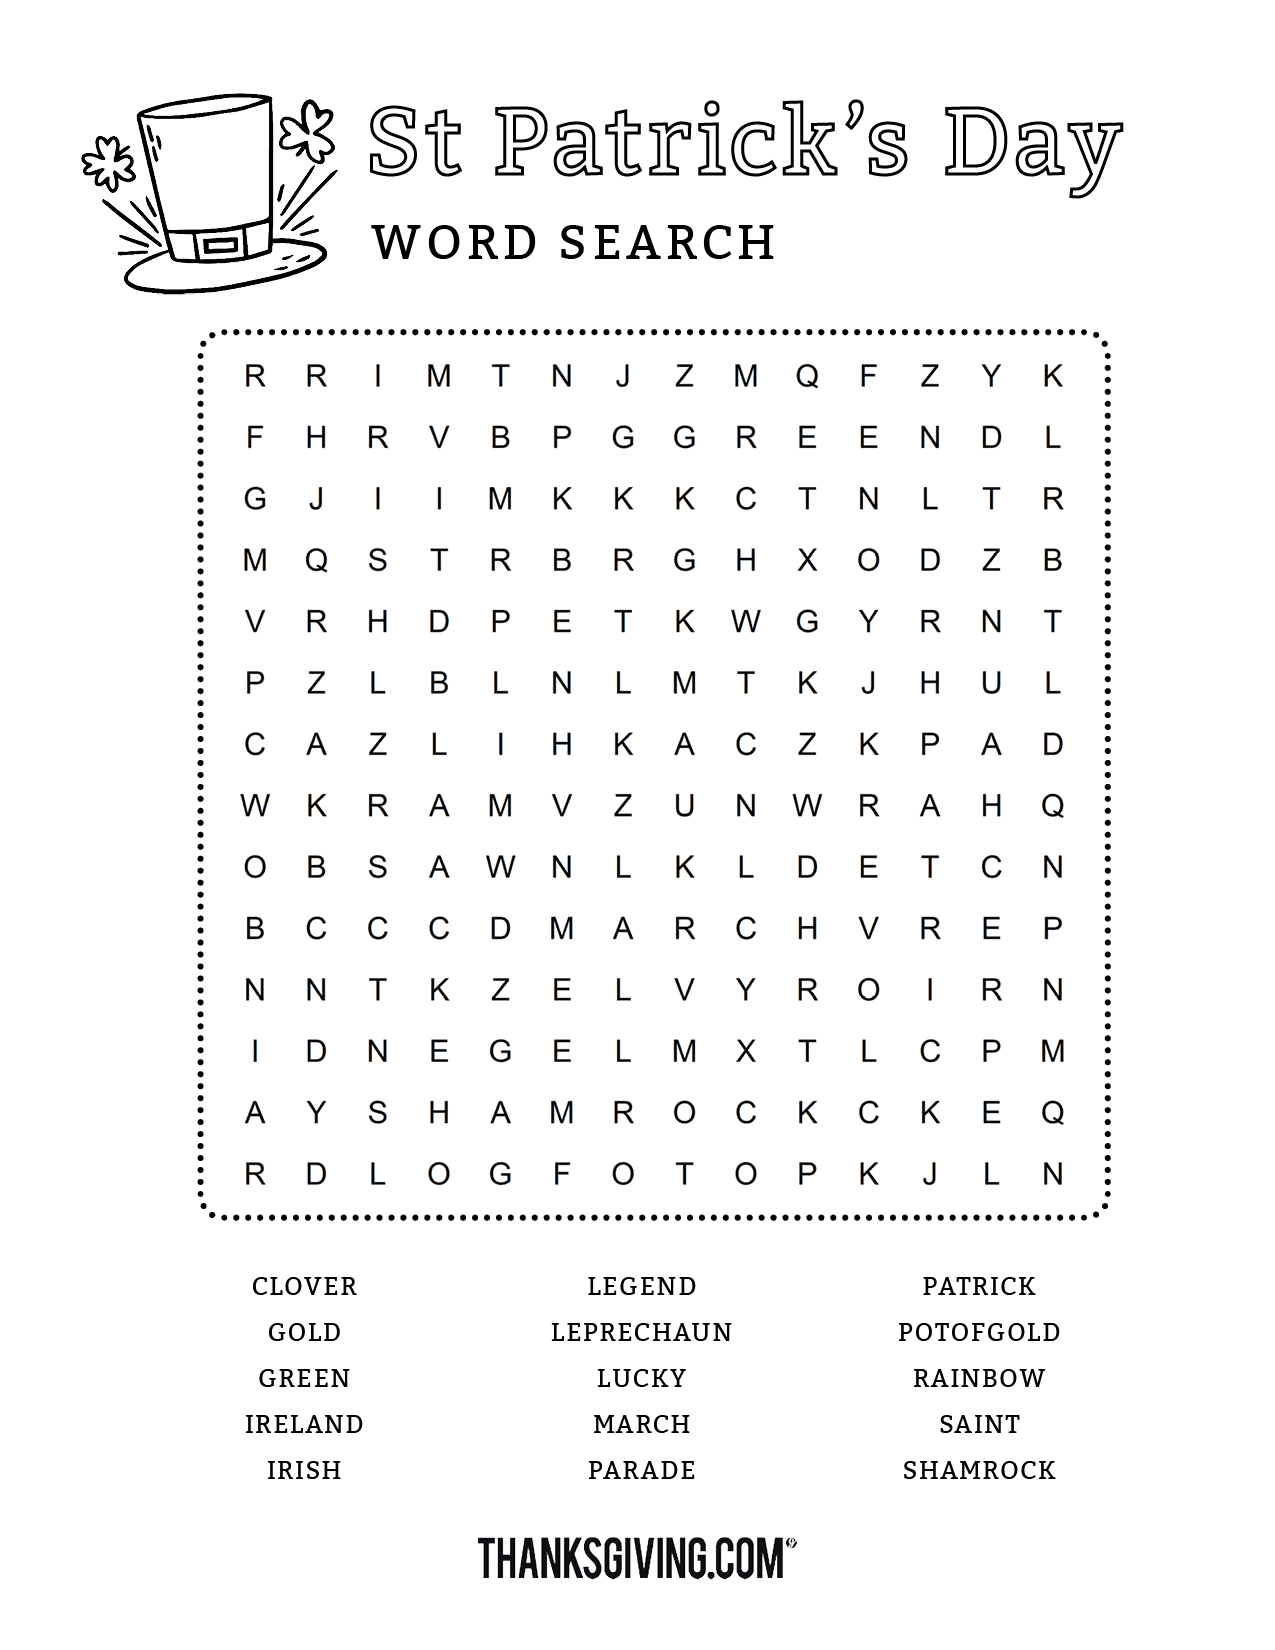 Word search - St Patrick's Day